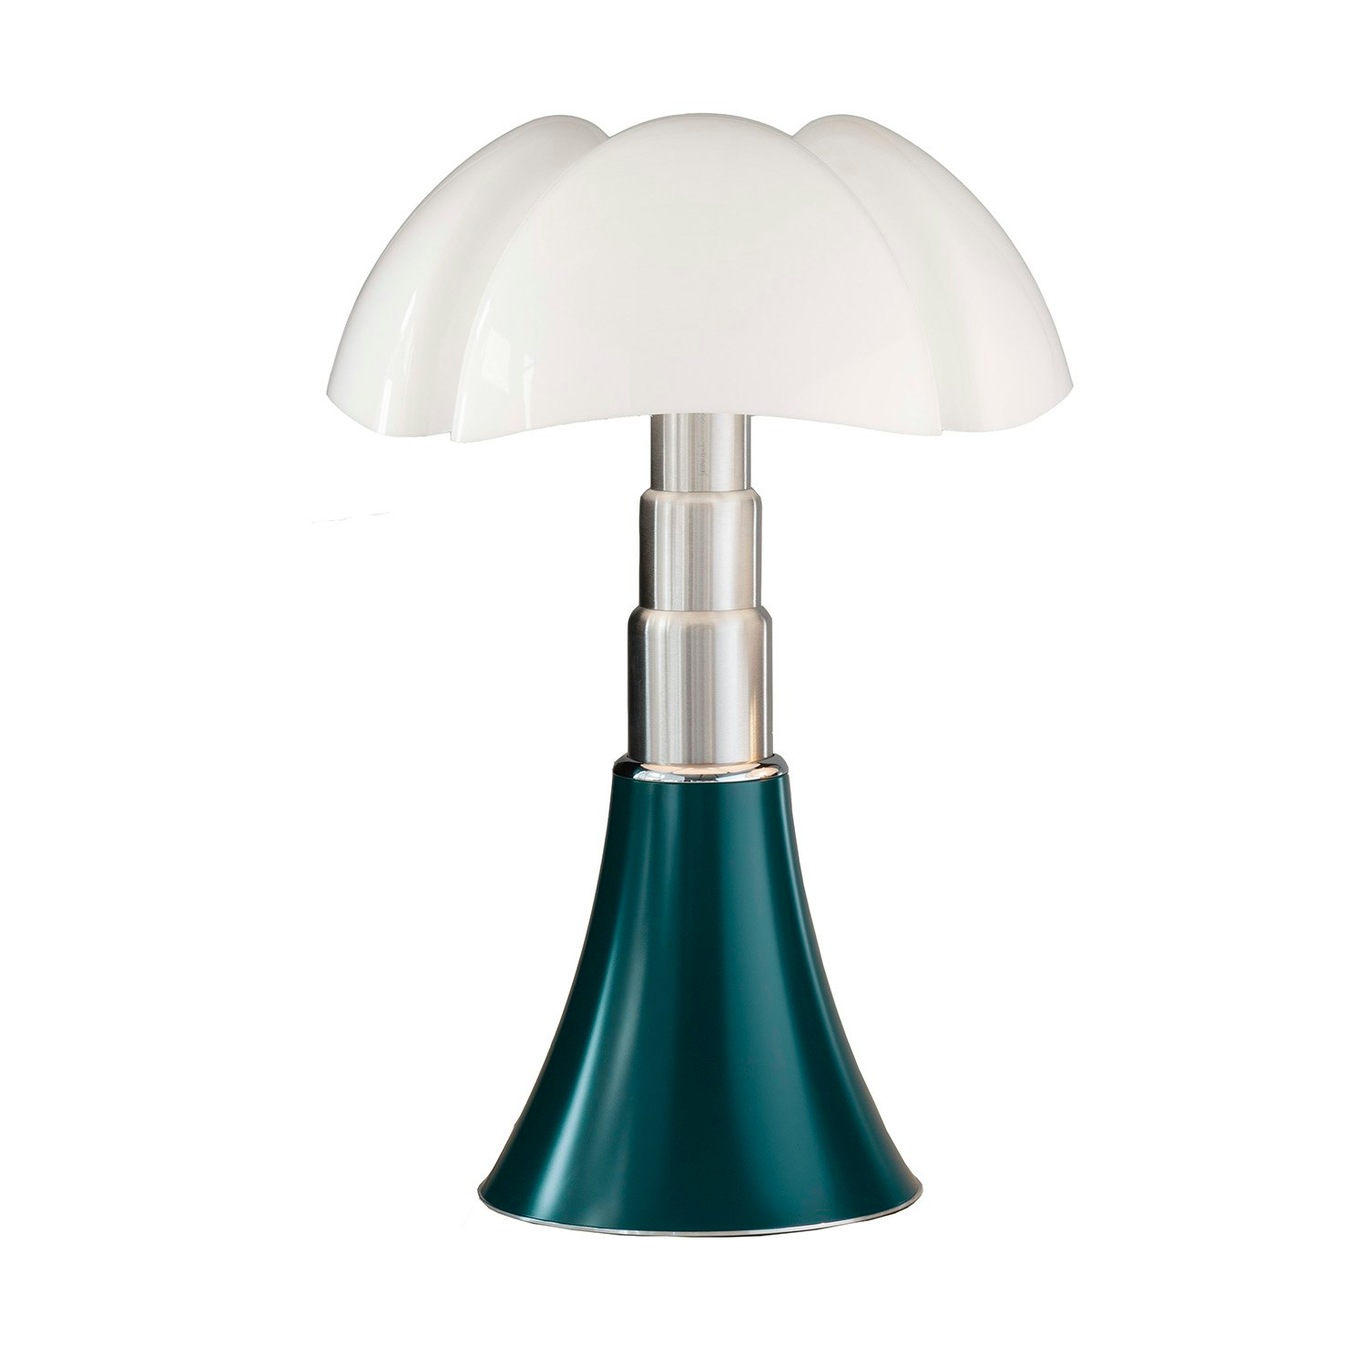 Pipistrello Large Table Lamp, Agave Green